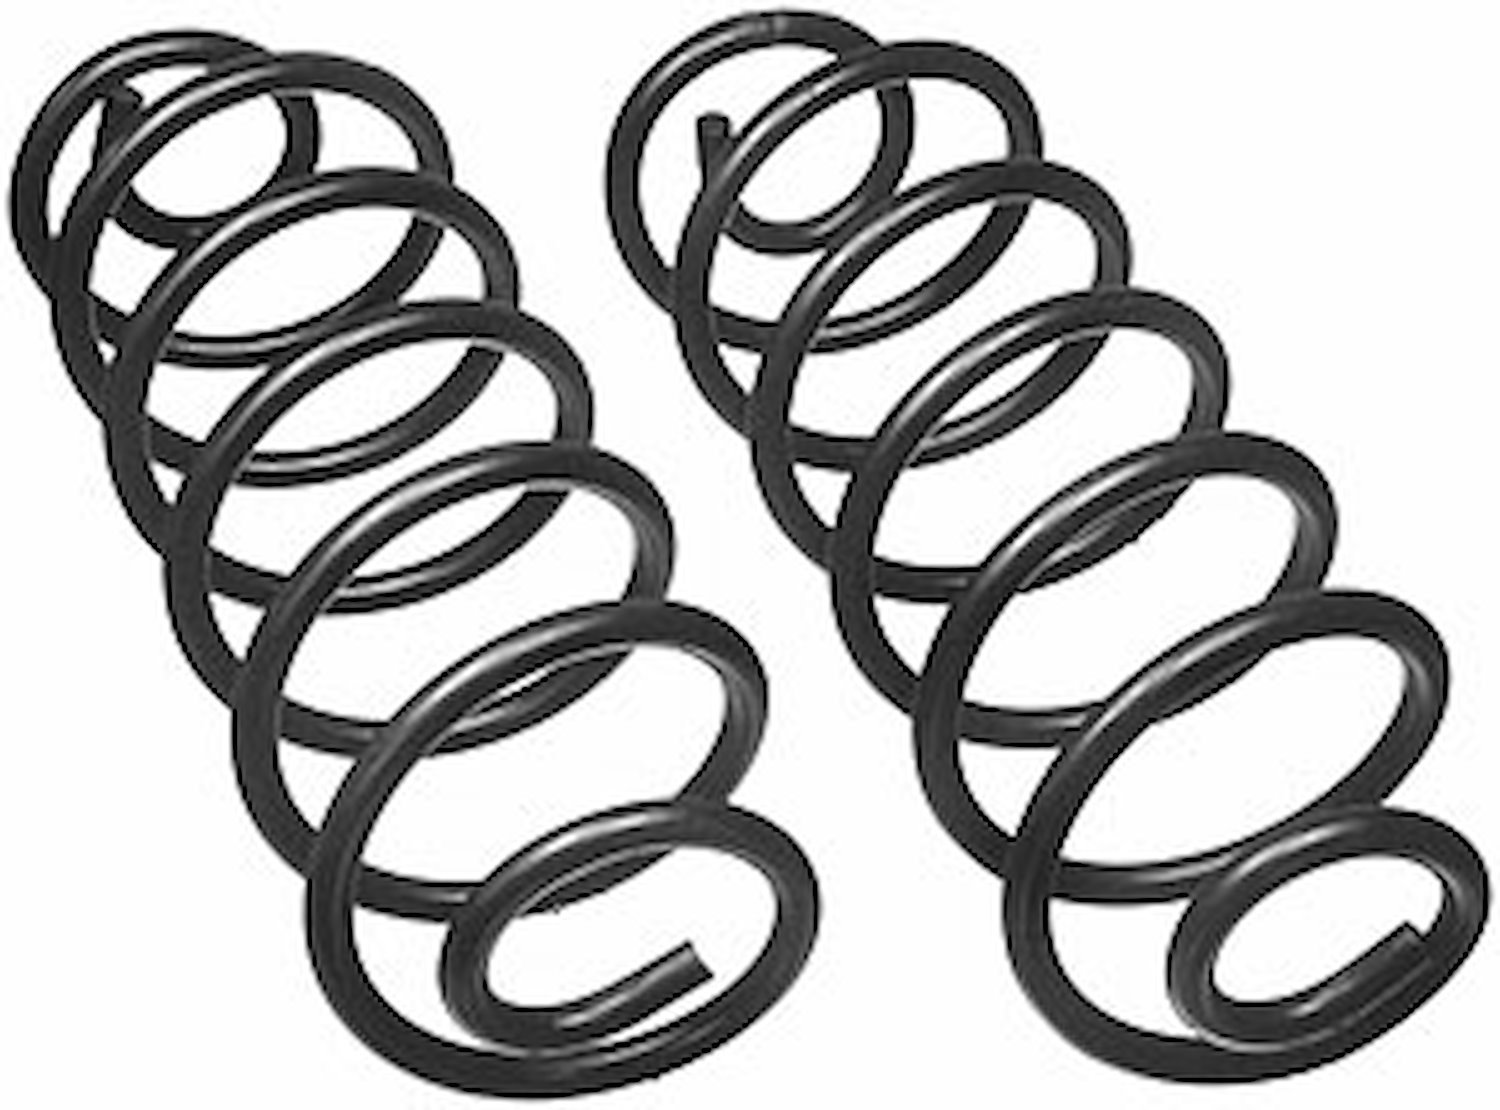 Rear Coil Springs Fit Select Buick, Cadillac, Chevy, Oldsmobile, Pontiac Cars